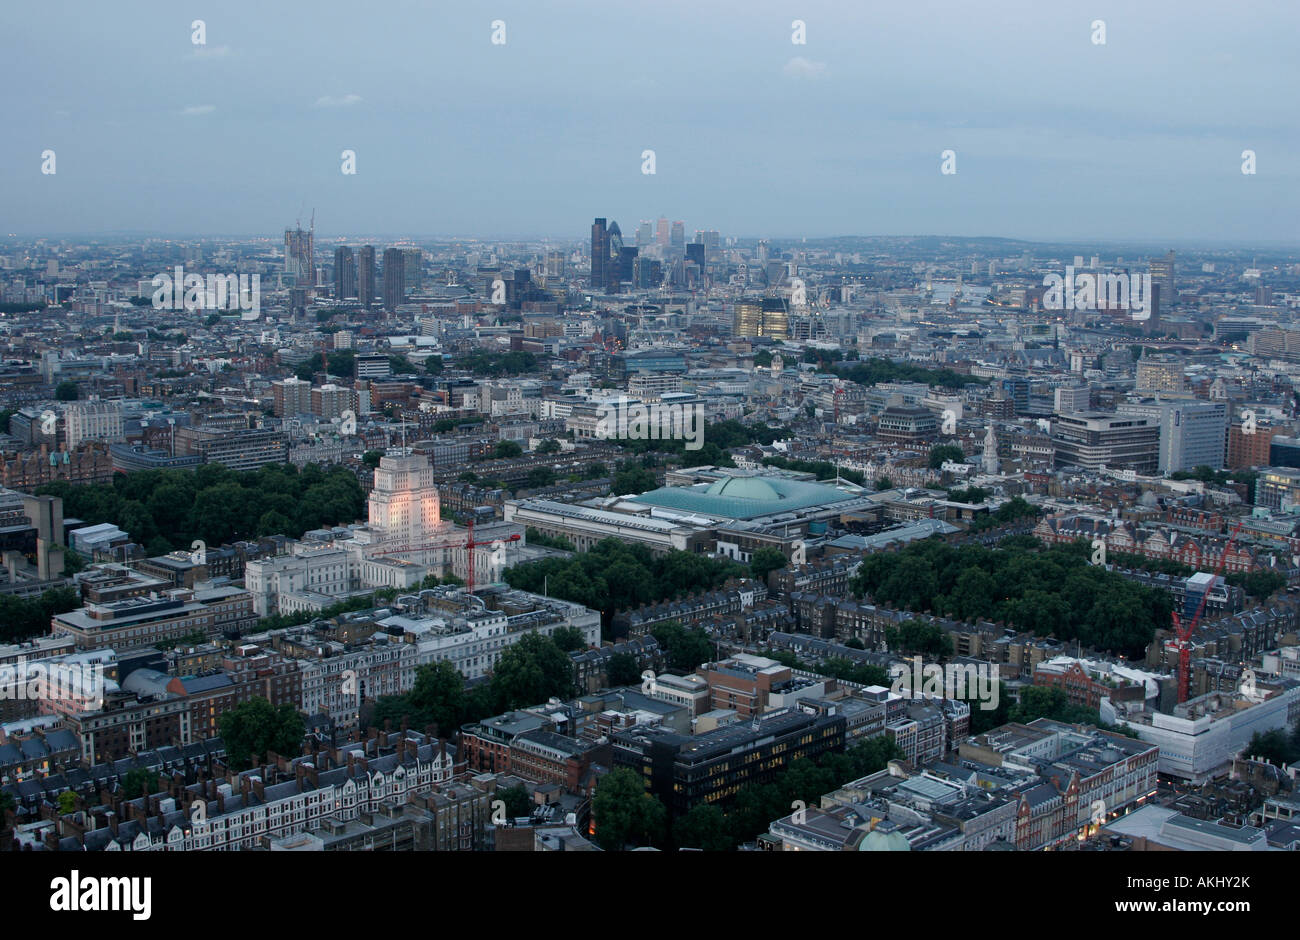 The view from the top of the BT Telecom Tower across to the City, St Paul's Cathedral and Tower Bridge Stock Photo